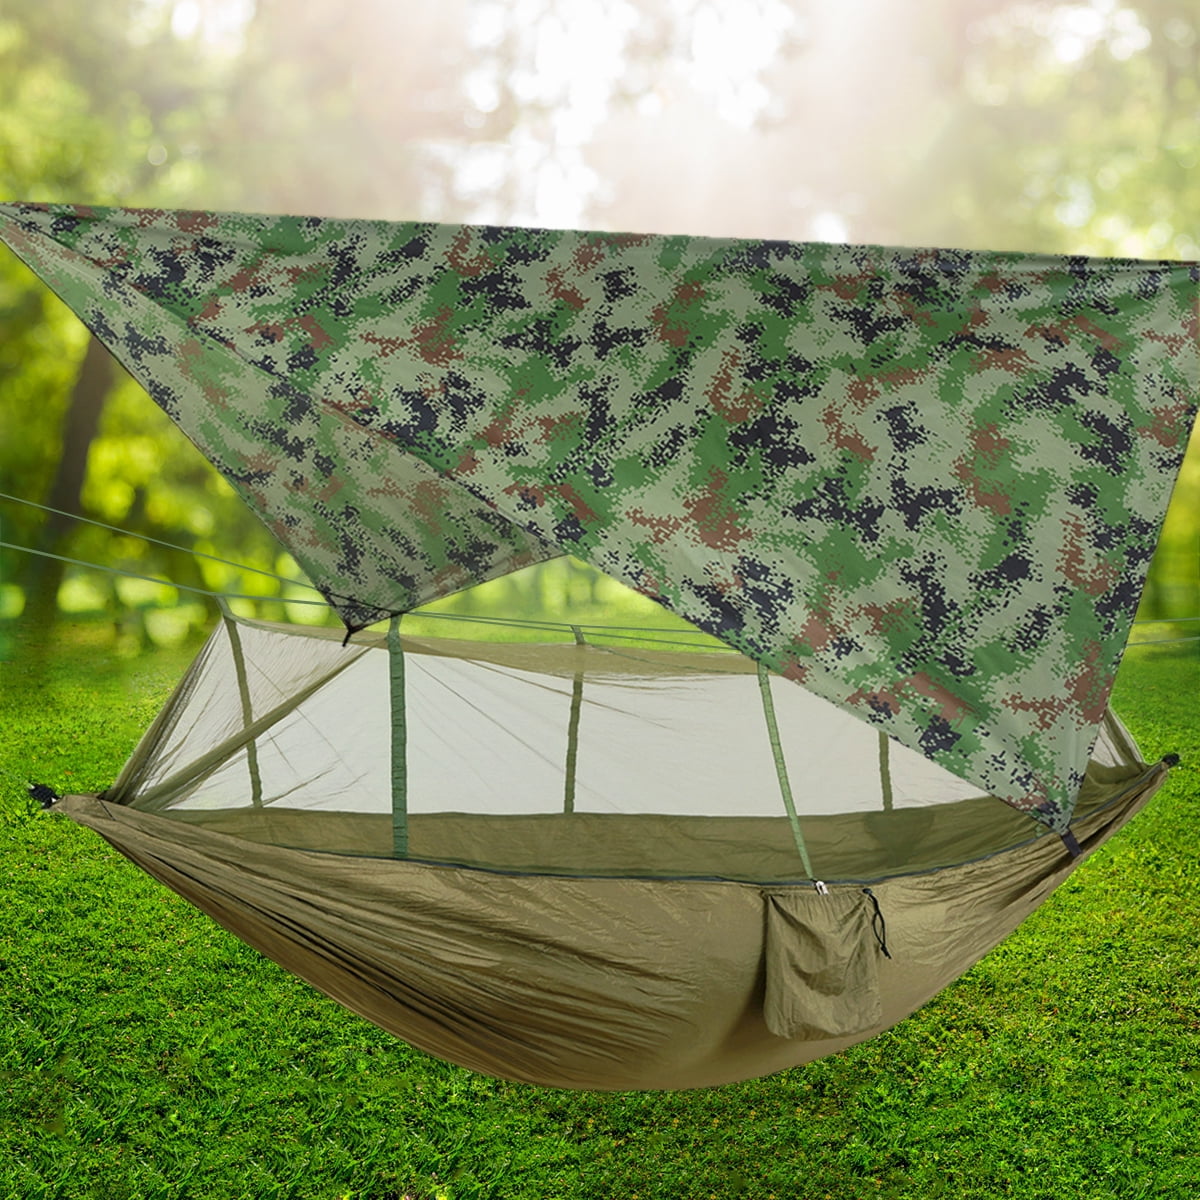  Oak Creek Camping Hammock and Accessories. Complete Package  with Mosquito Bug Net, Rain Fly, Tree Straps. Great for Hiking,  Backpacking, and Travel. Weighs Only 4 Pounds. Carbon Gray. : Deportes y